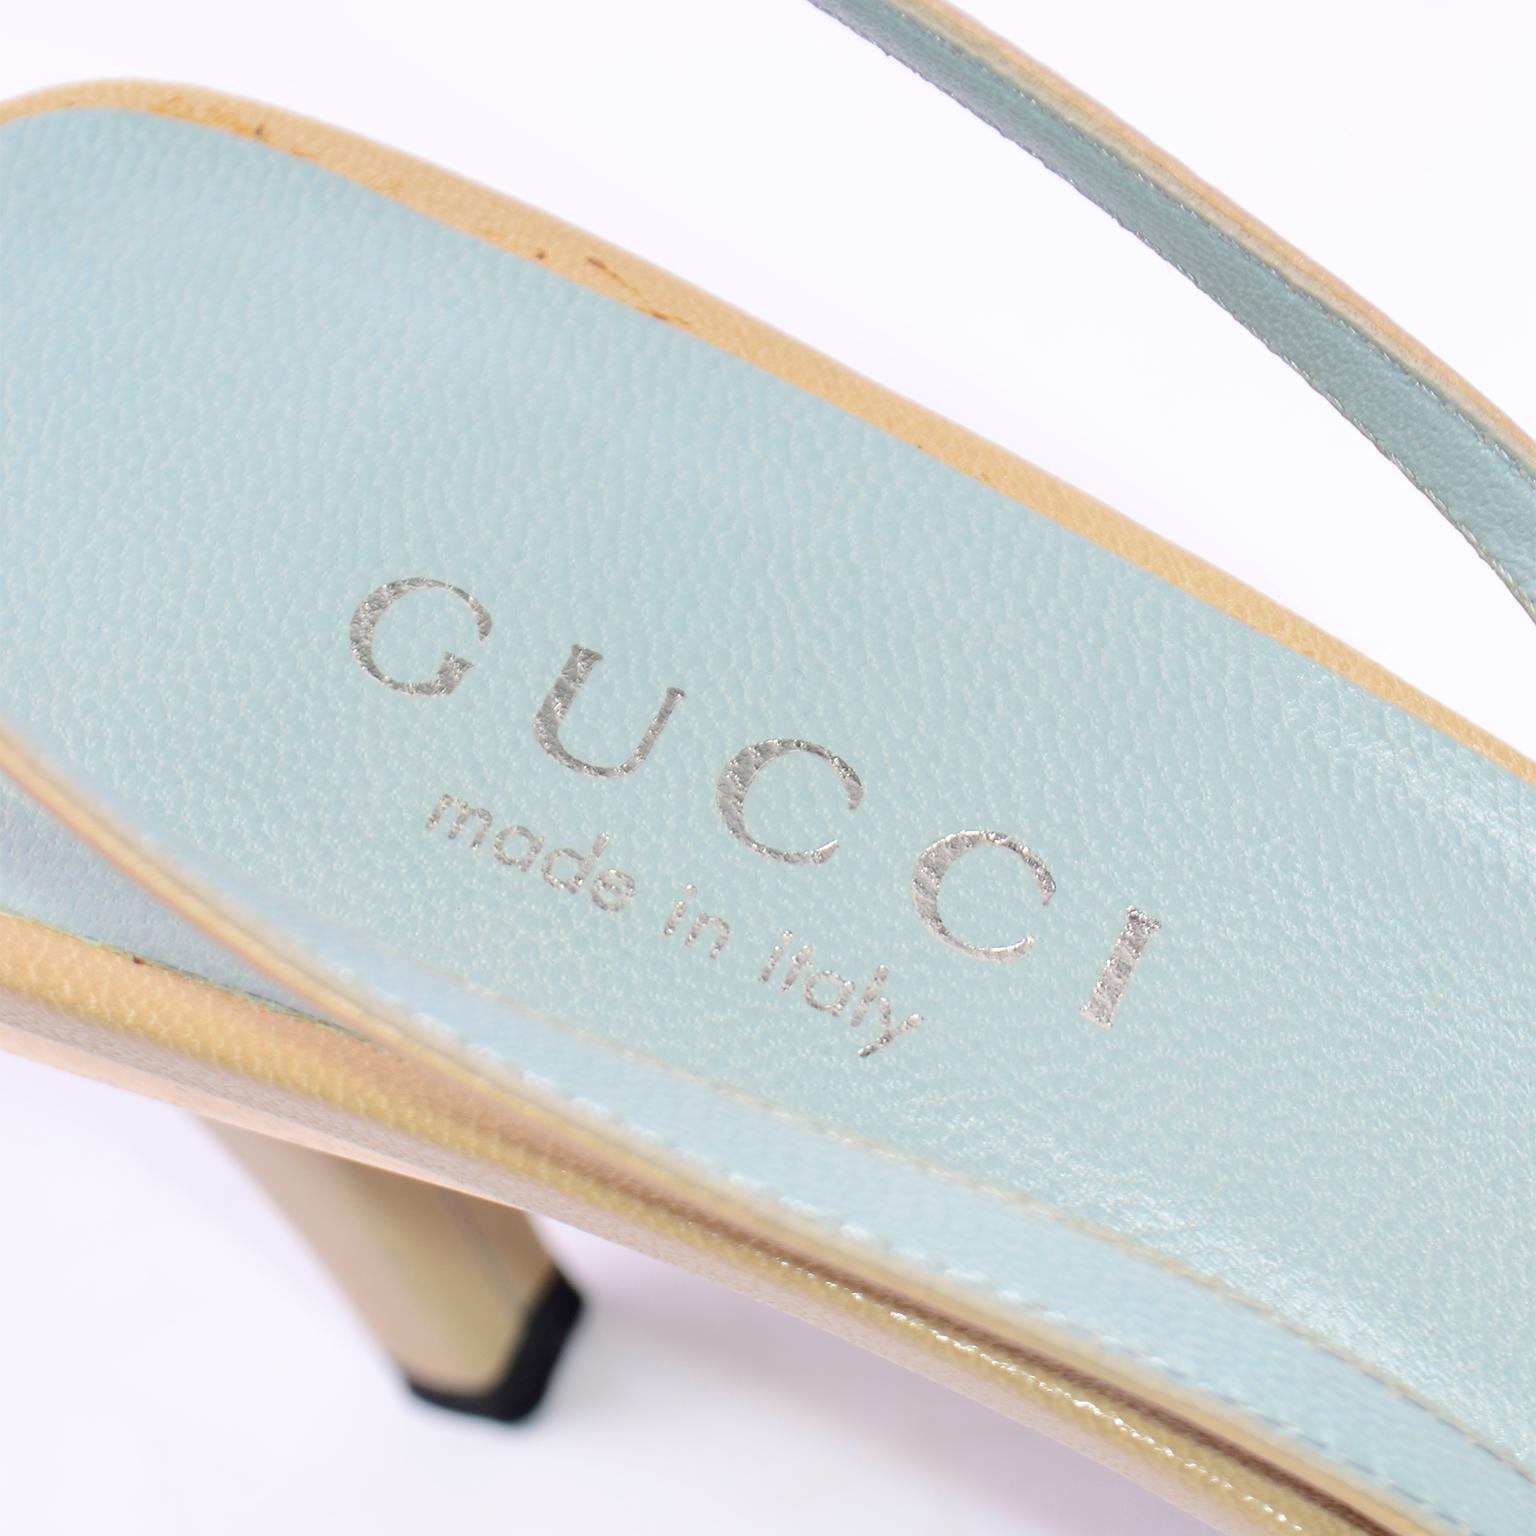 Gucci Slingback Beige Tan Heels With Gold Bands For Sale 4